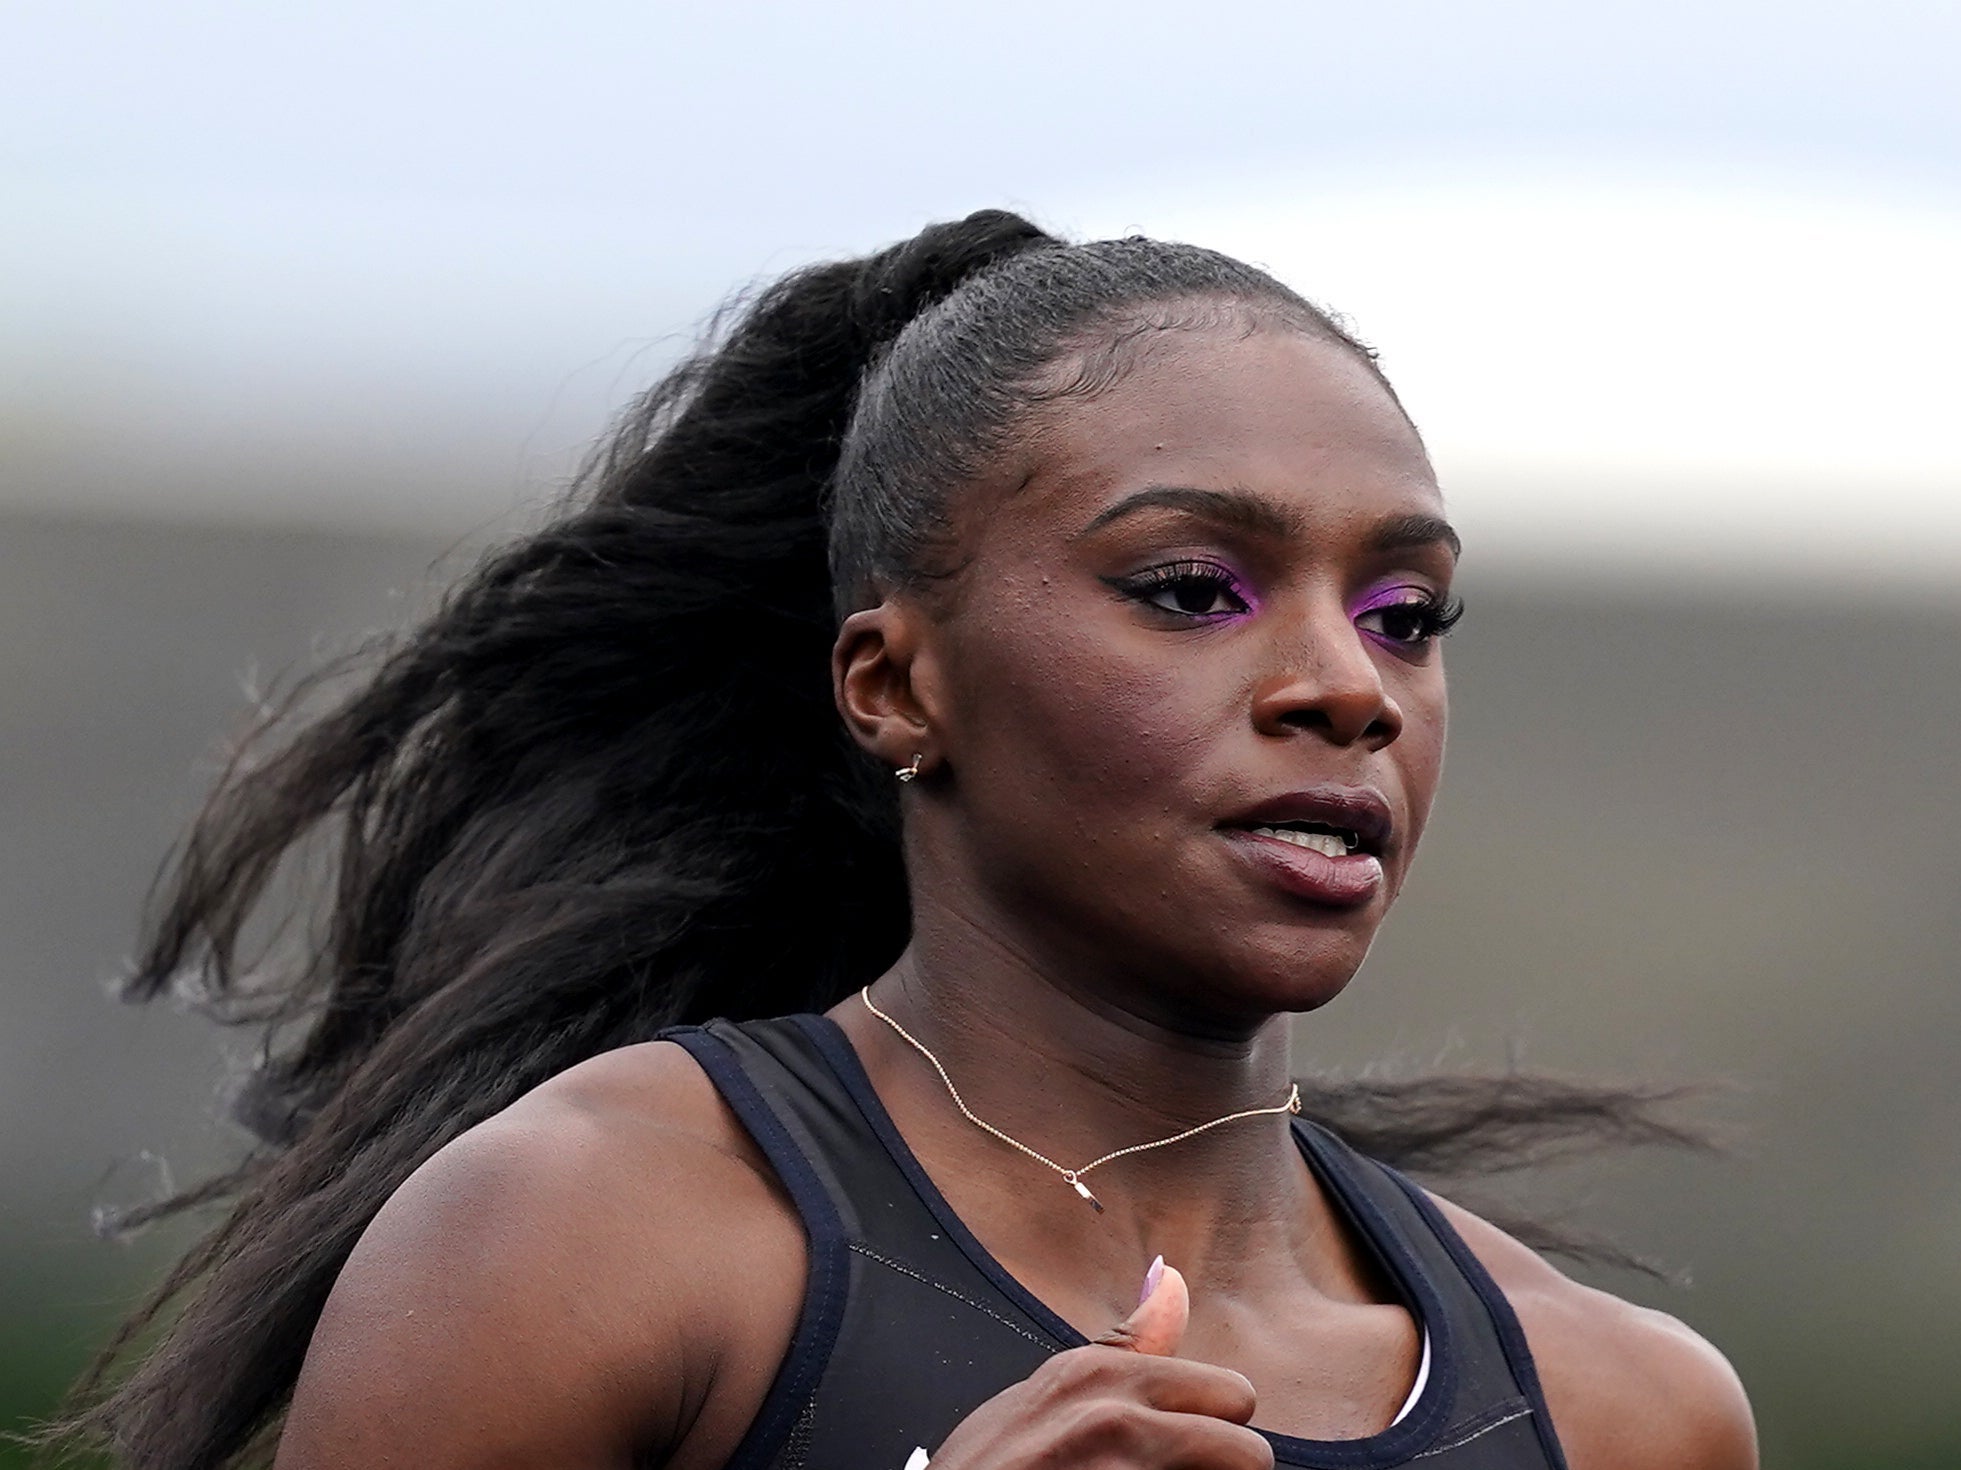 Dina Asher-Smith has withdrawn from the British Grand Prix